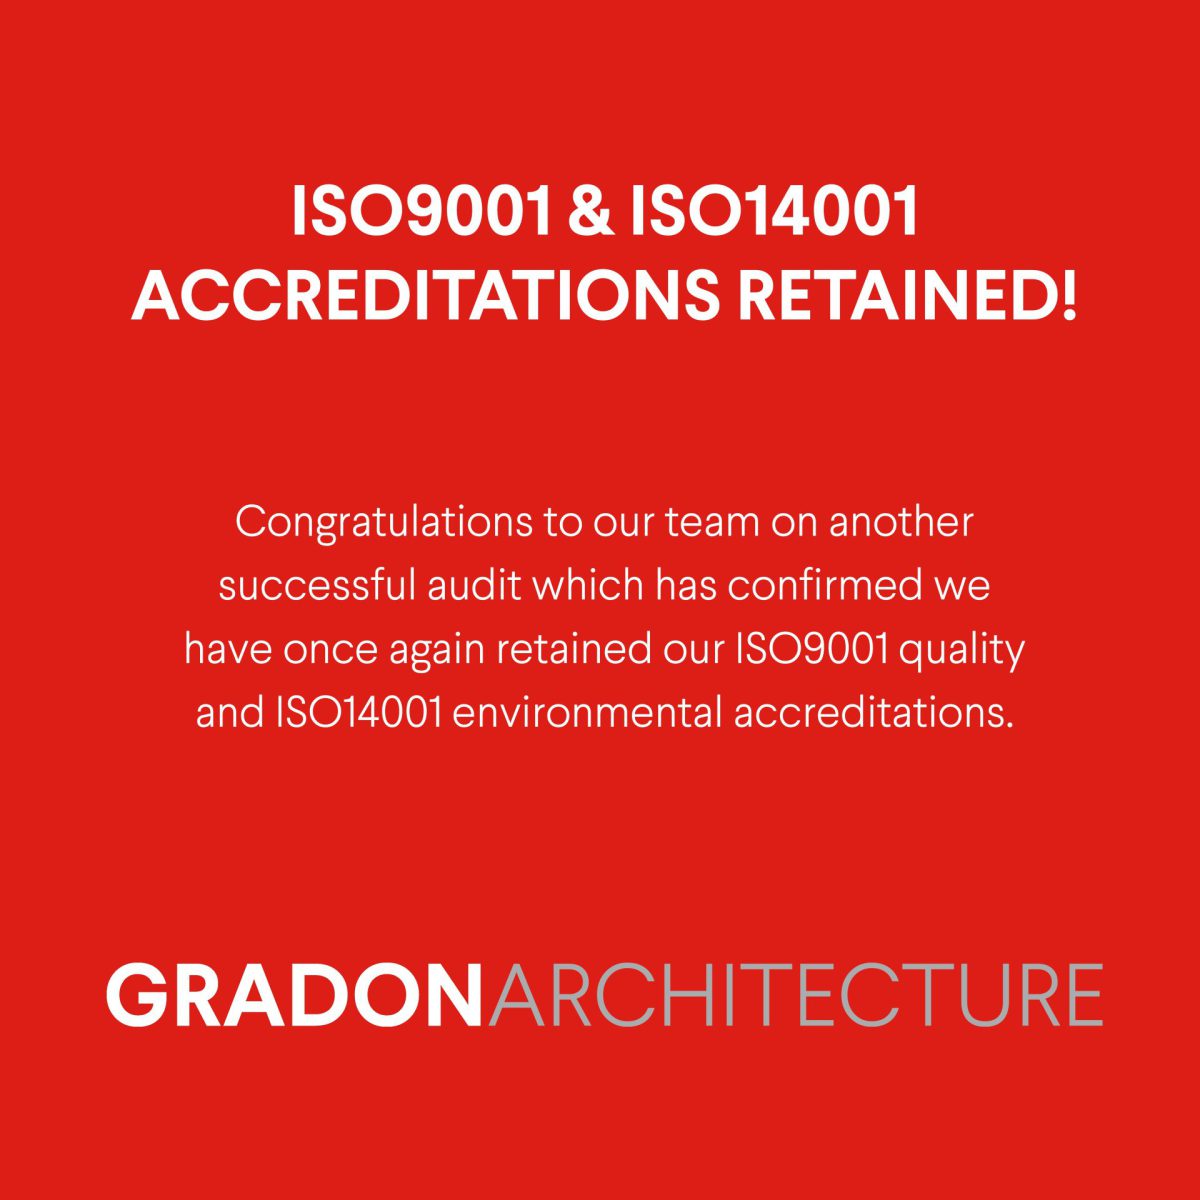 ISO9001 & ISO14001 Accreditations Retained!